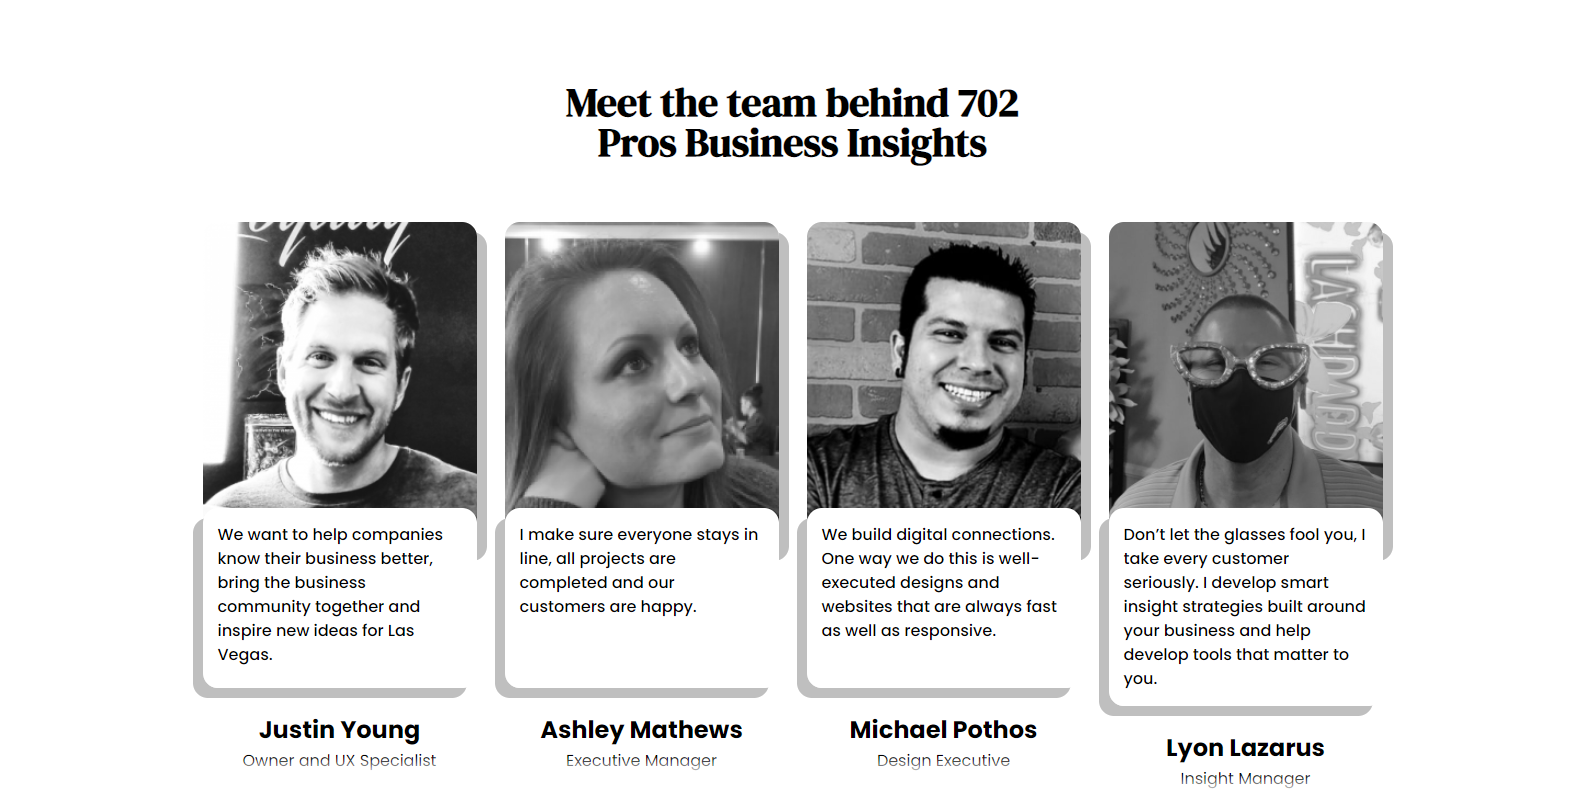 Business Insights by 702 Pros